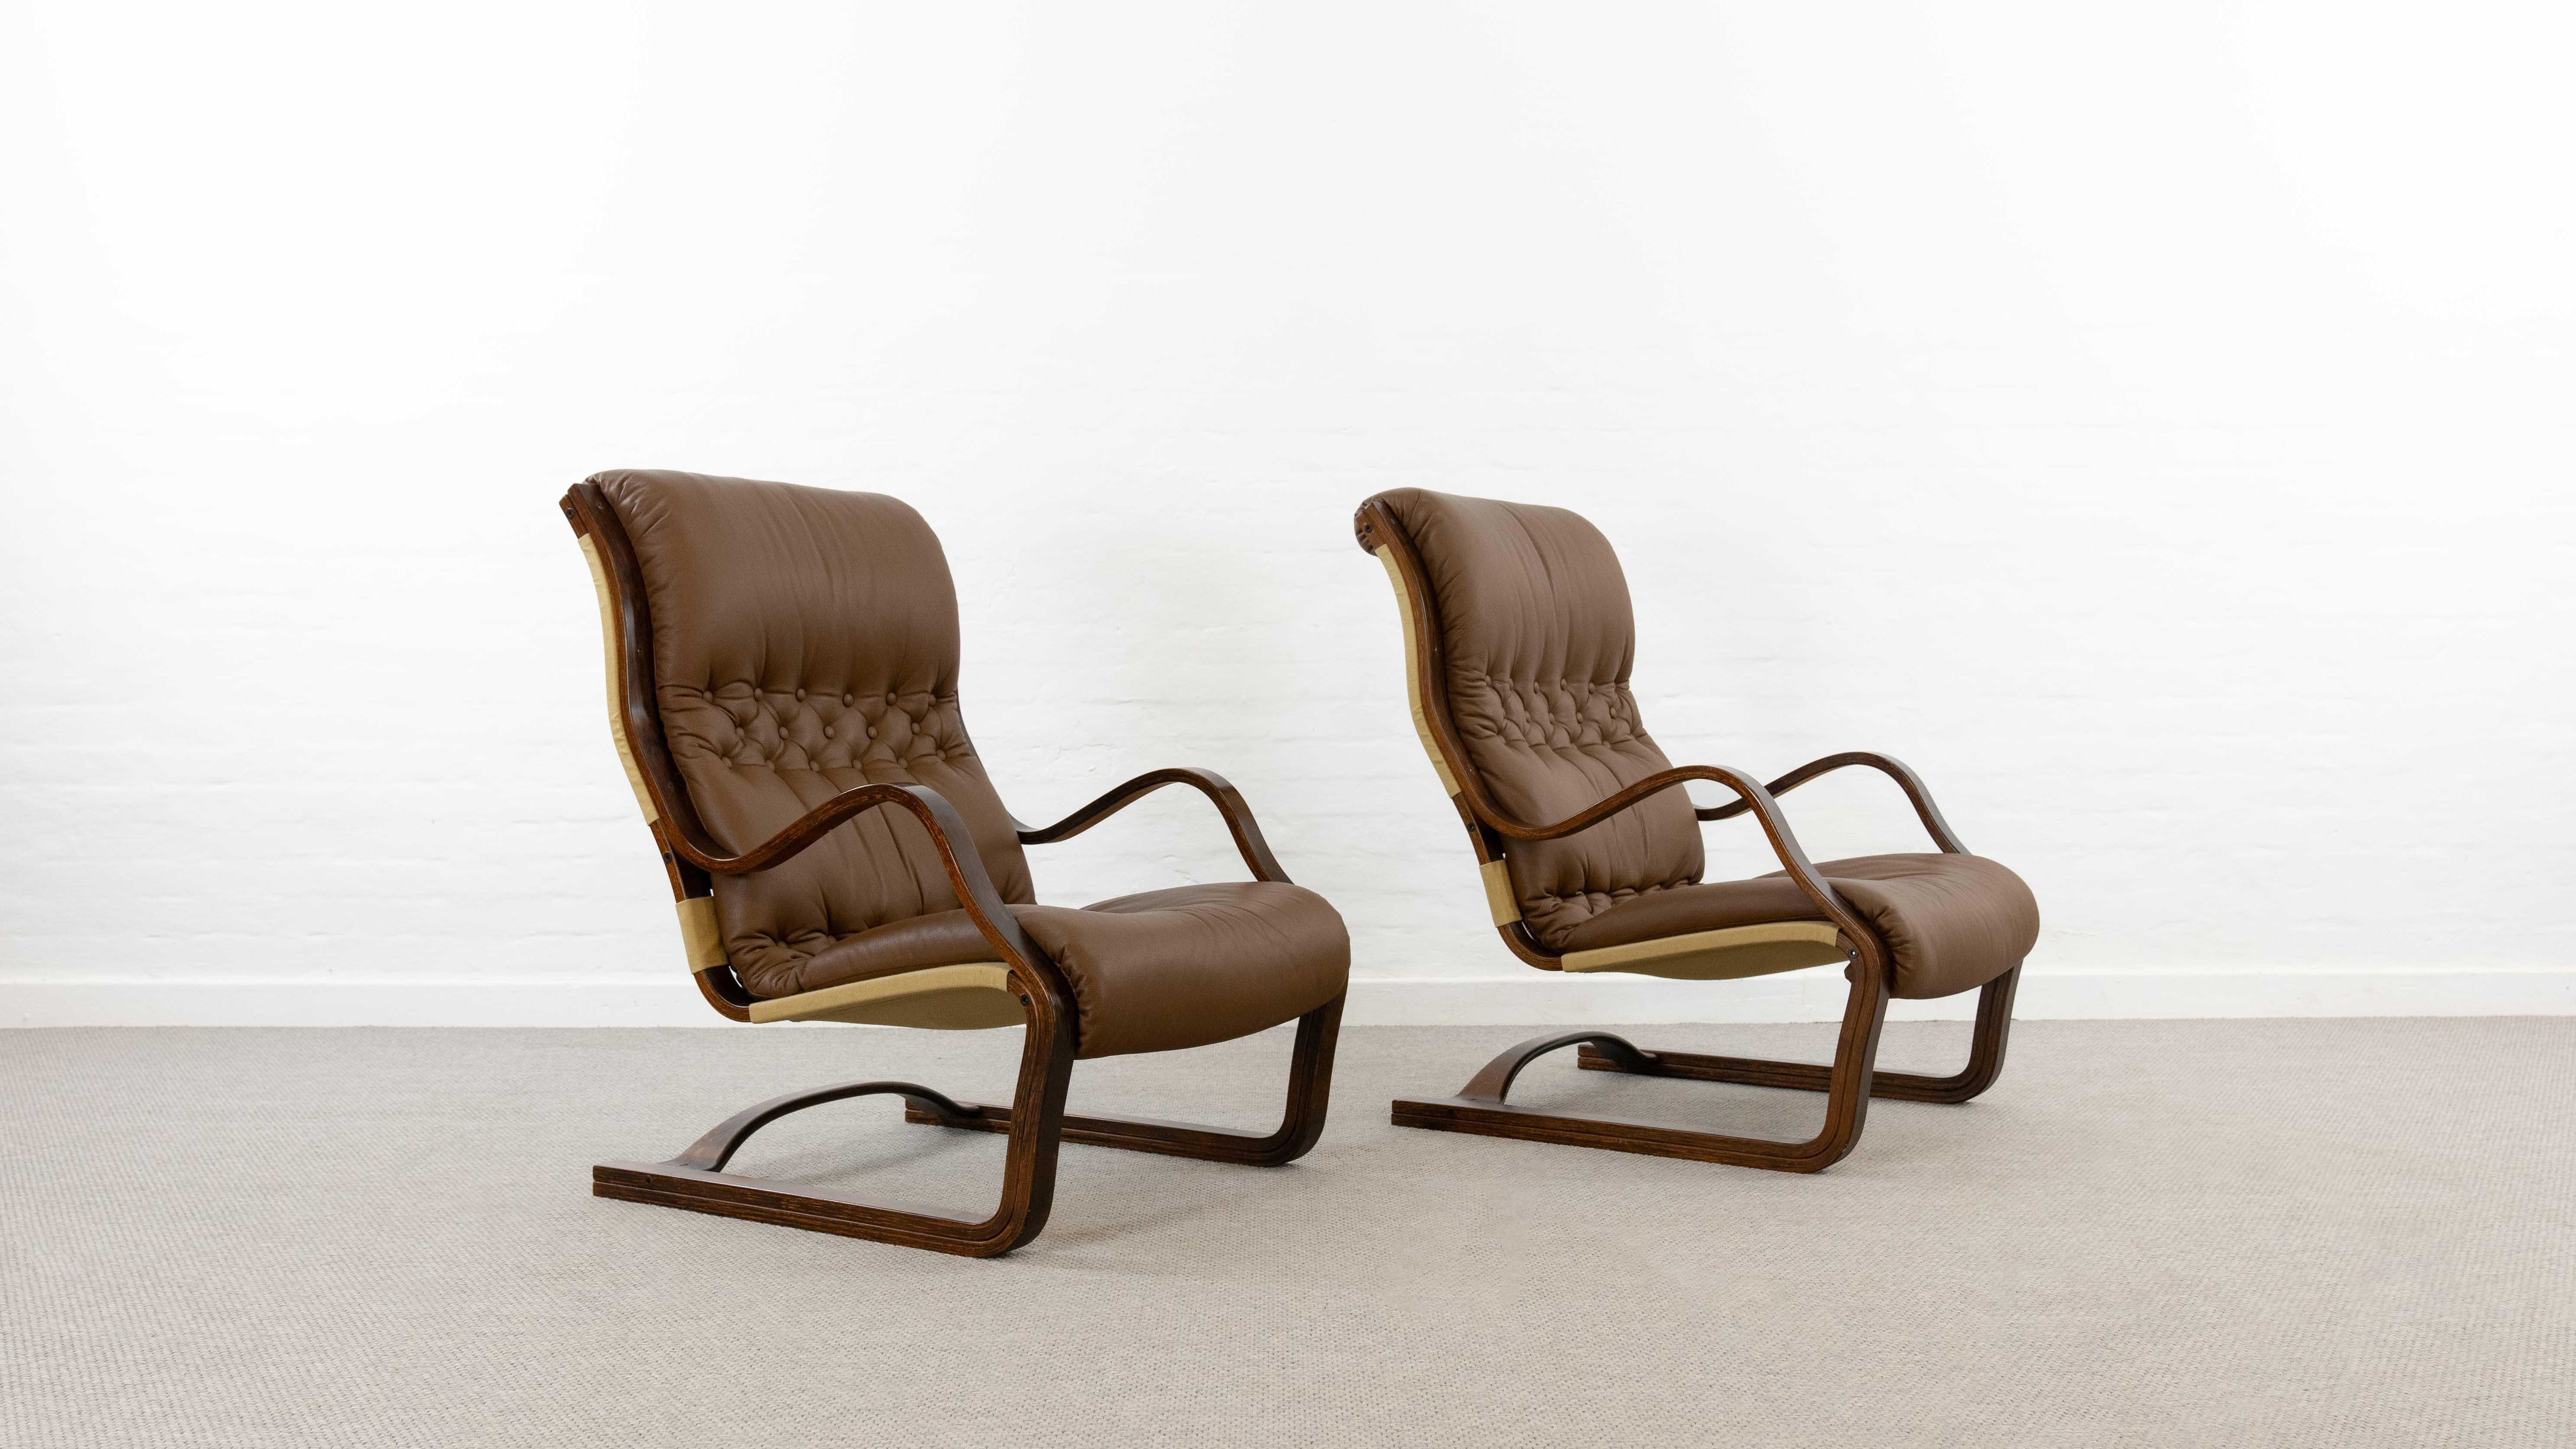 Set of 2 Koivutaru freepending easy chairs. Designed 1977 by Esko Pajamies for Asko, Finland. Upholstered in its original brown buttoned leather. The perfect fireplace chair. Very nice bent wood forming of the armrests and the chairbase. Stained